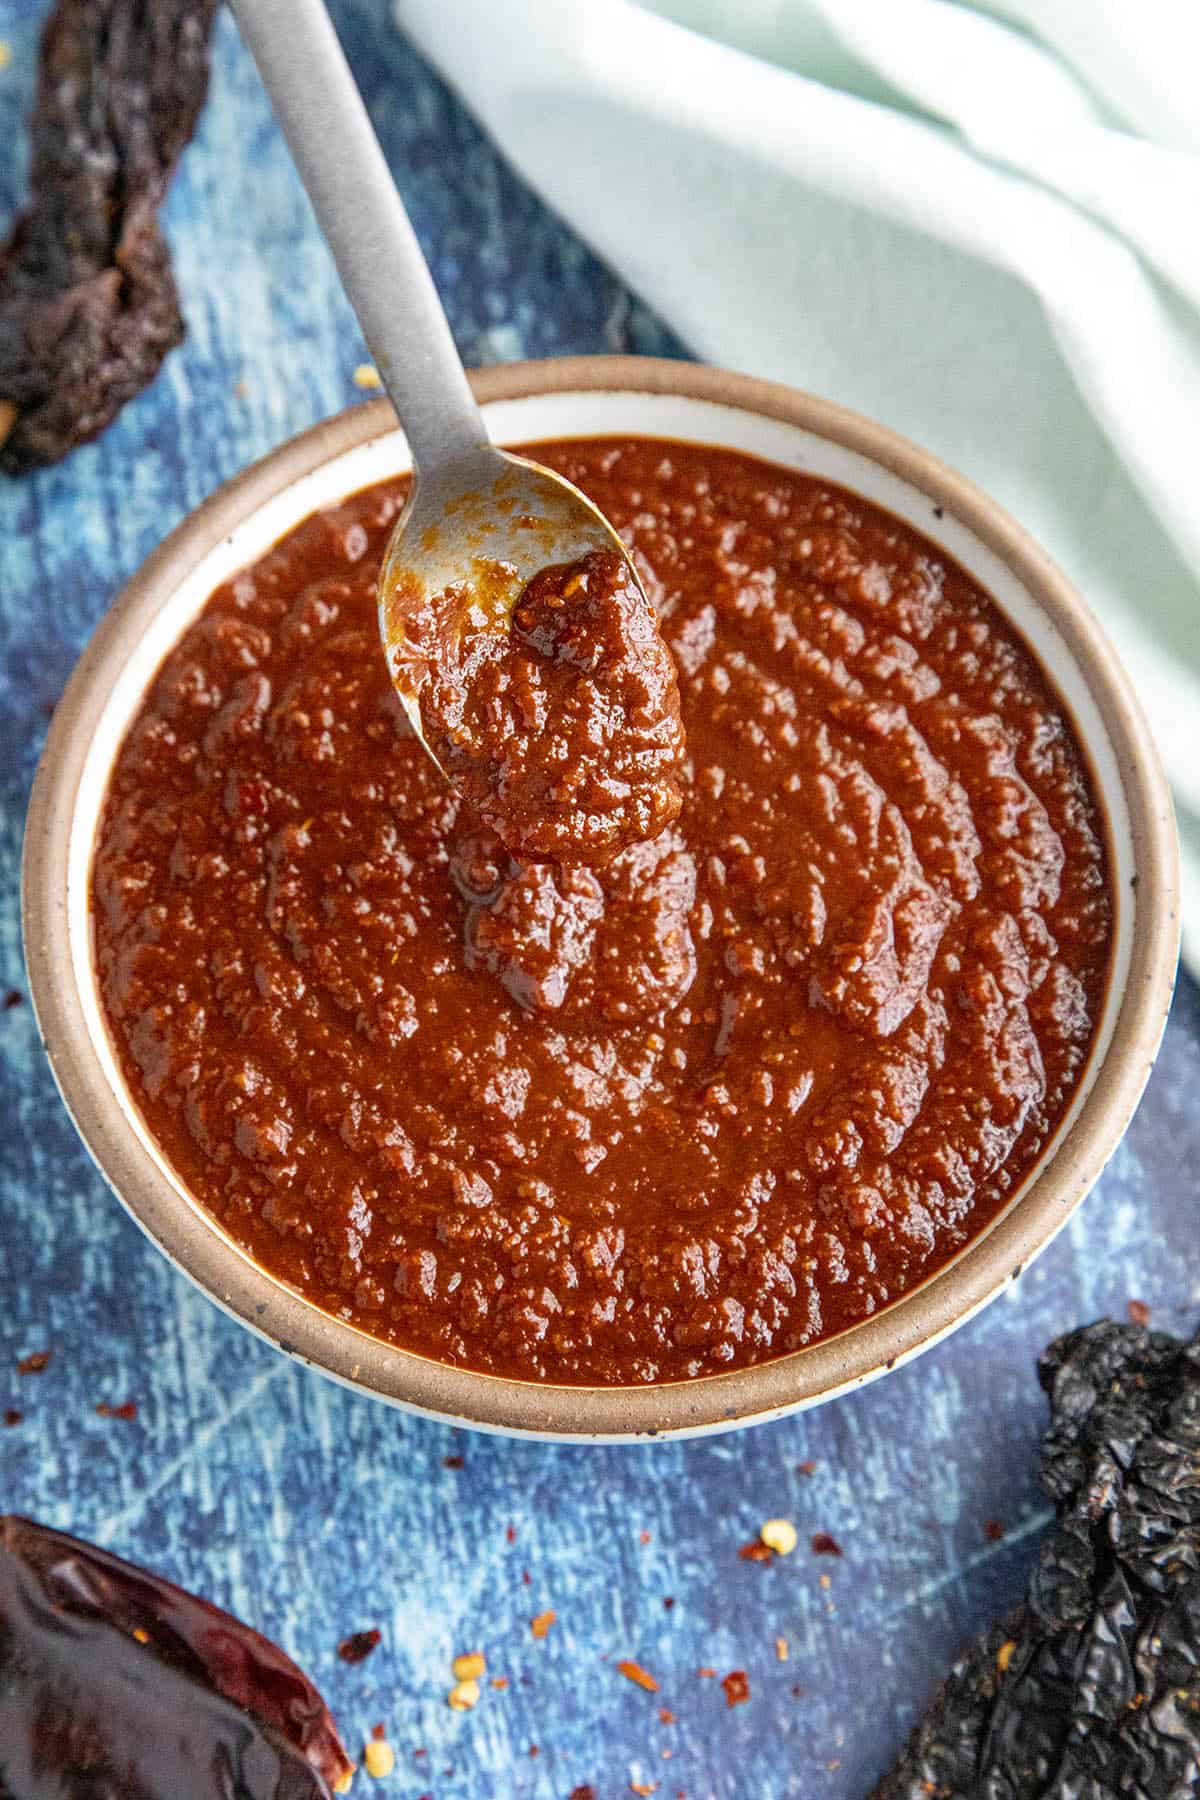 Spicpy adobo sauce with guajillo peppers